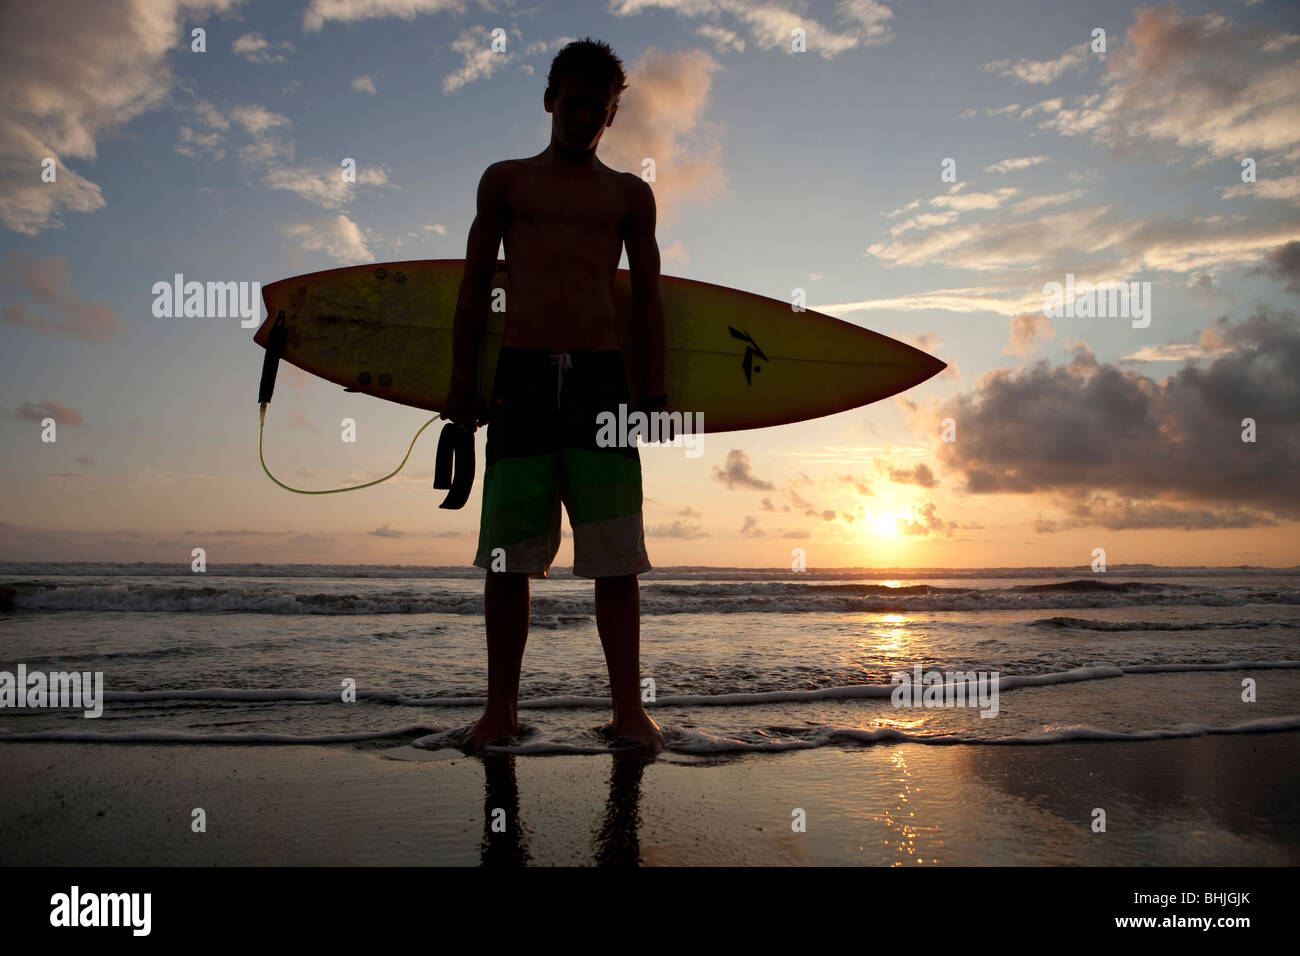 Surfer on Playa Hermosa in Costa Rica, Central America Stock Photo